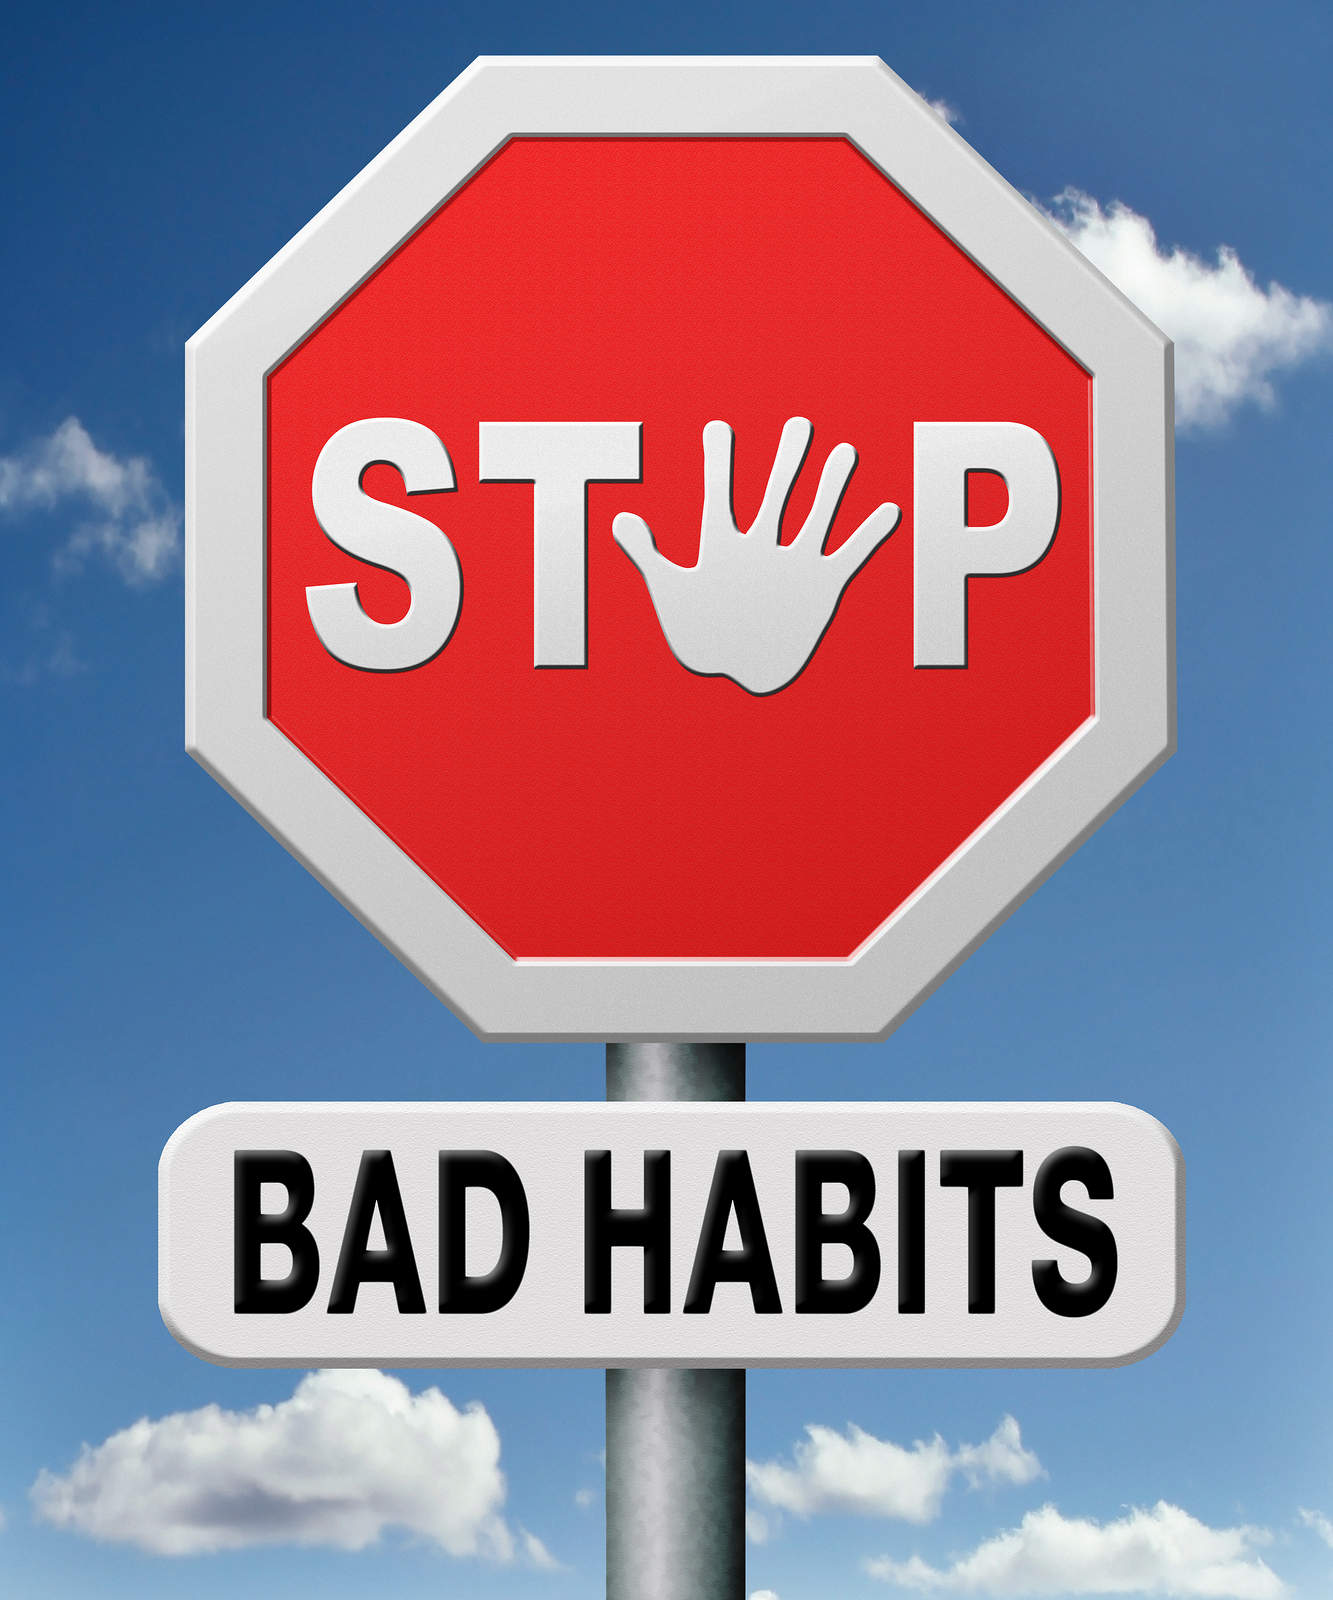 4 Common Dirty Habits You Must Stop Practicing Before 2018 ...